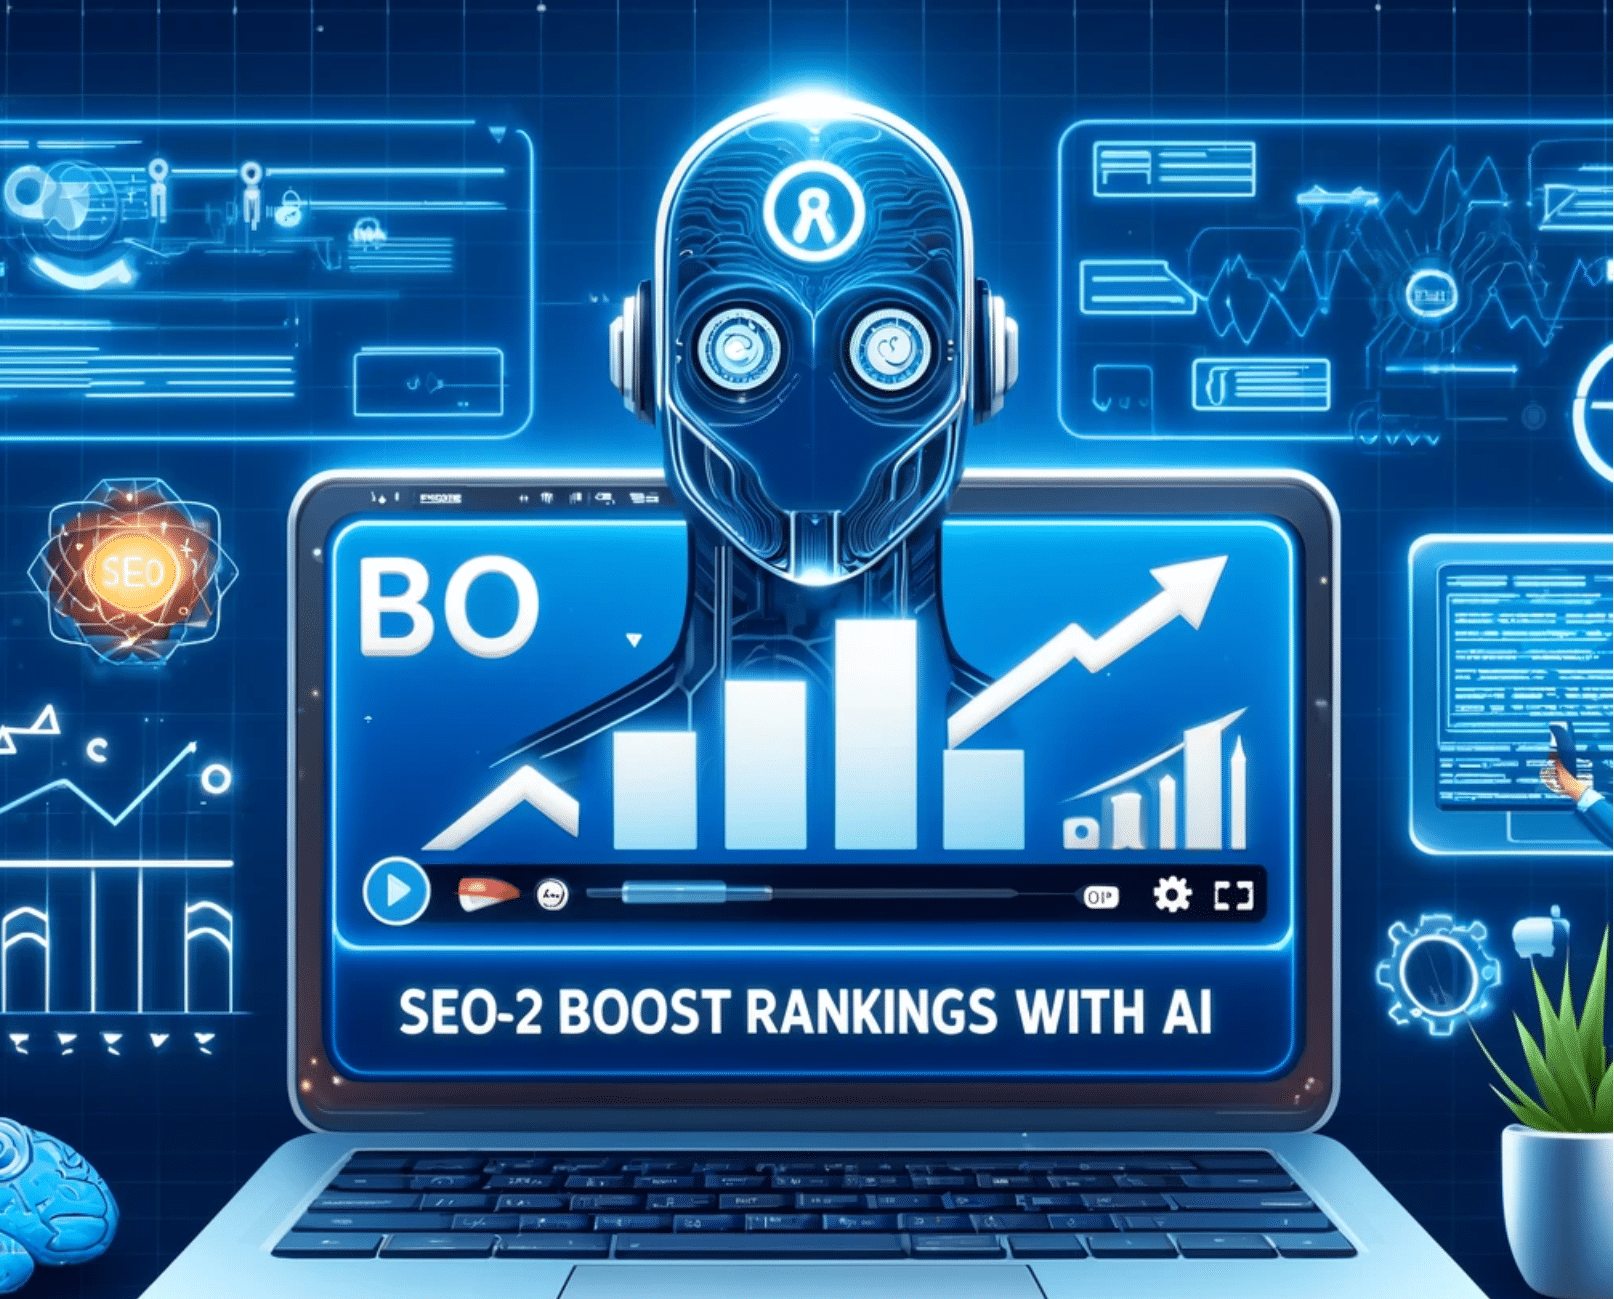 GPT-4 SEO Strategy for B2B: Boost Rankings with AI